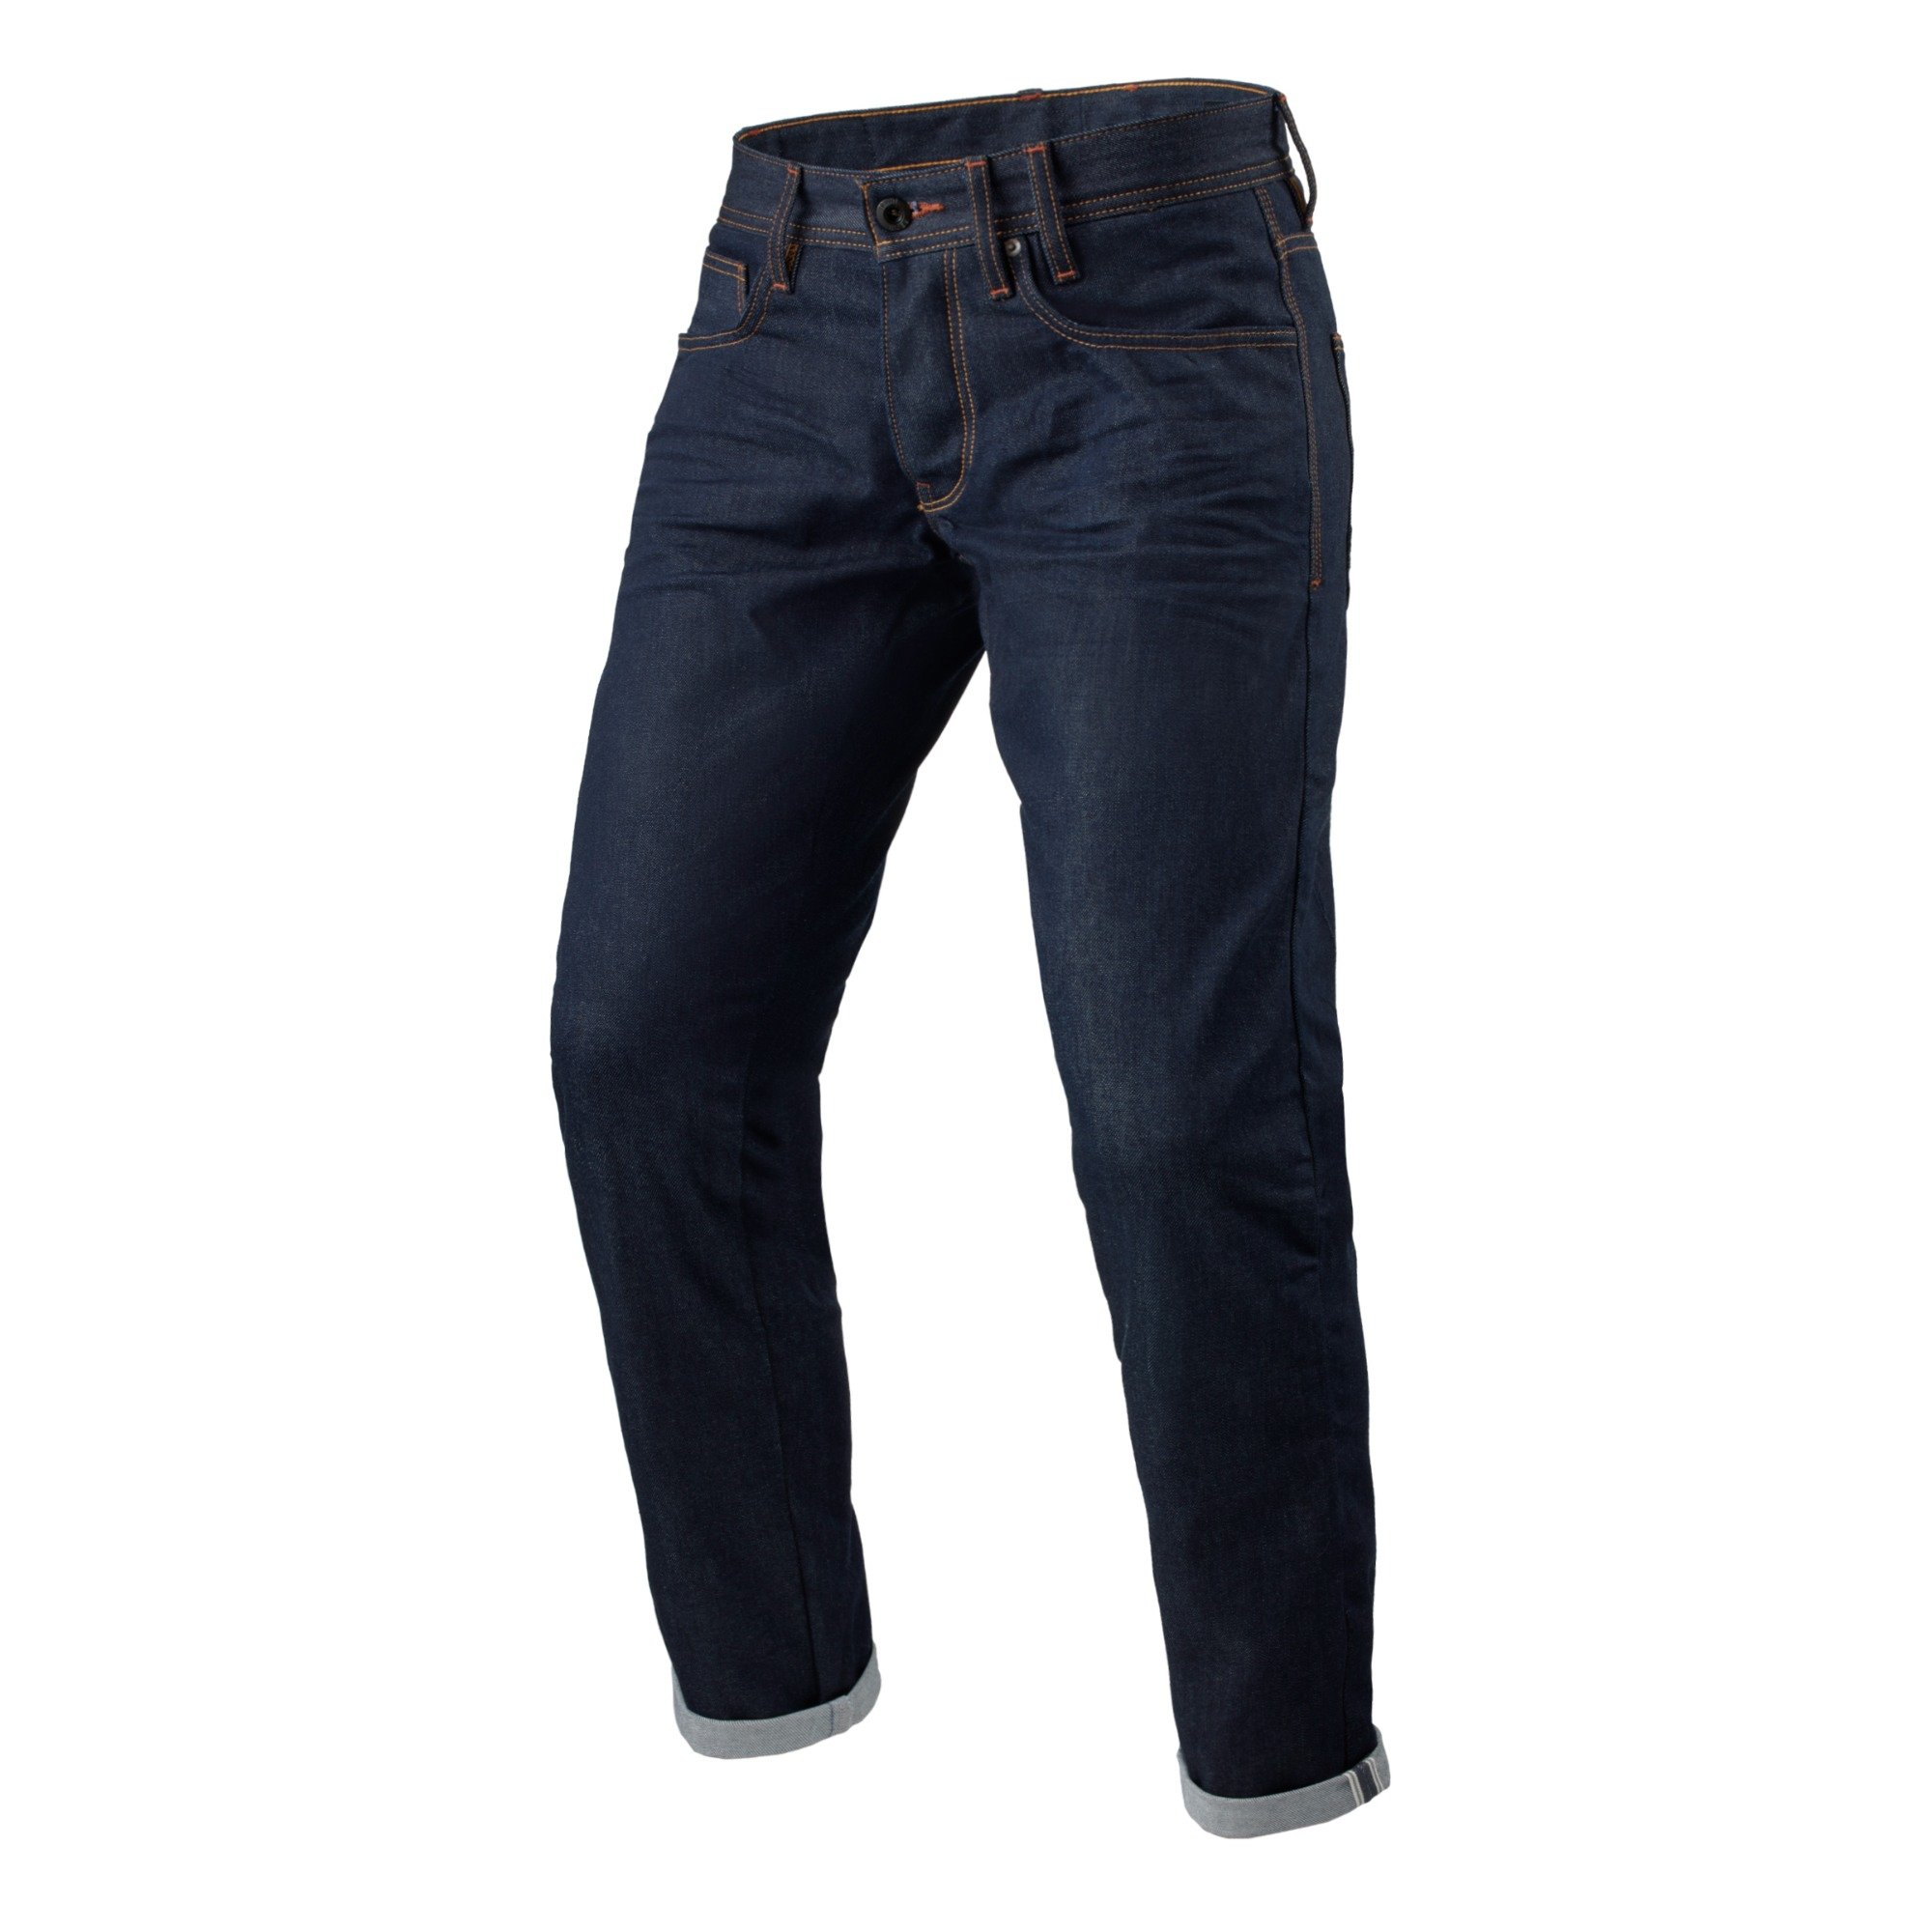 Image of REV'IT! Jeans Lewis Selvedge TF Dark Blue L34 Motorcycle Pants Size L34/W32 ID 8700001357968